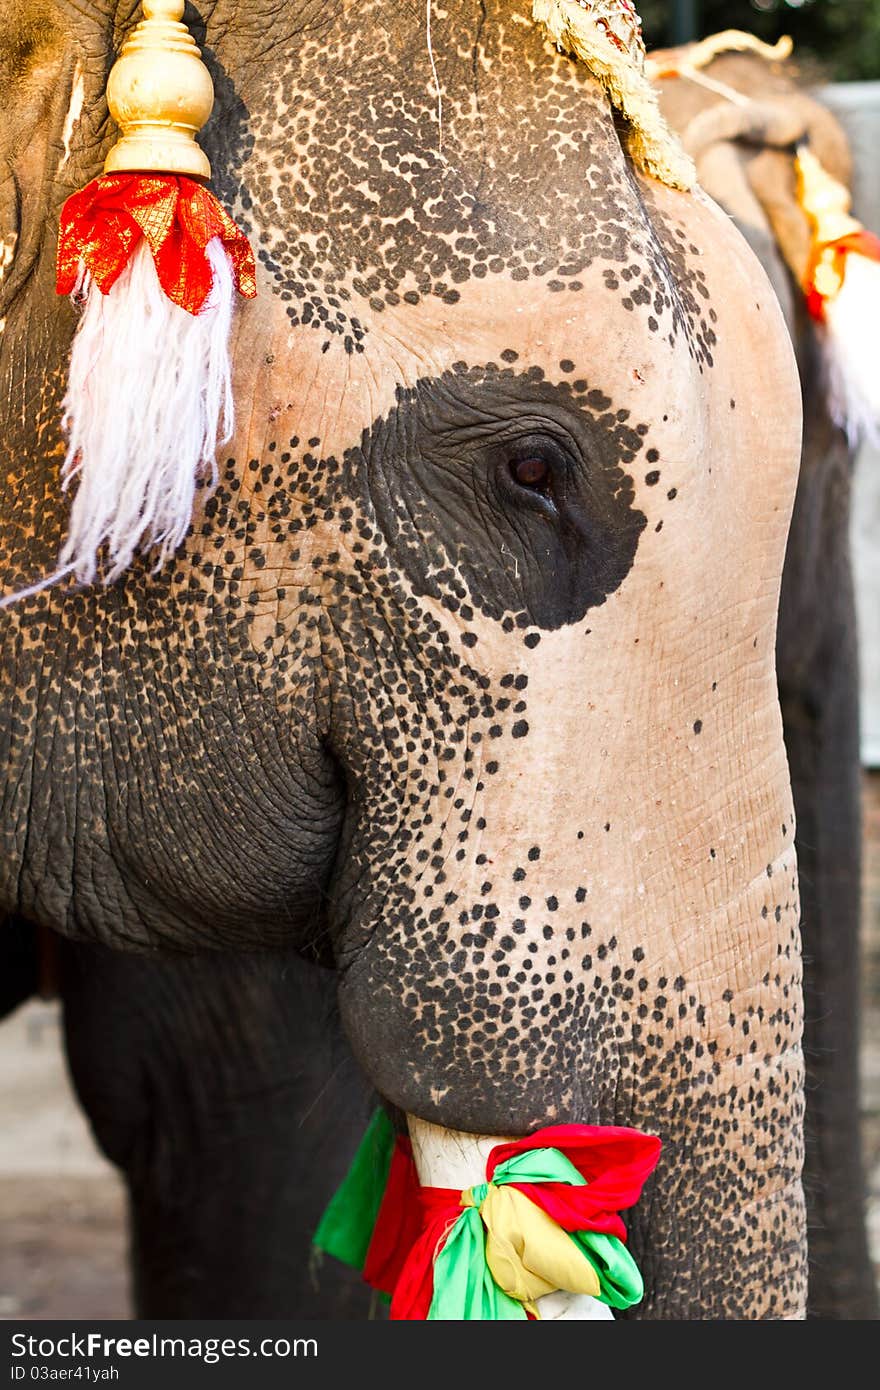 Elephant face close up in lopburi of Thailand